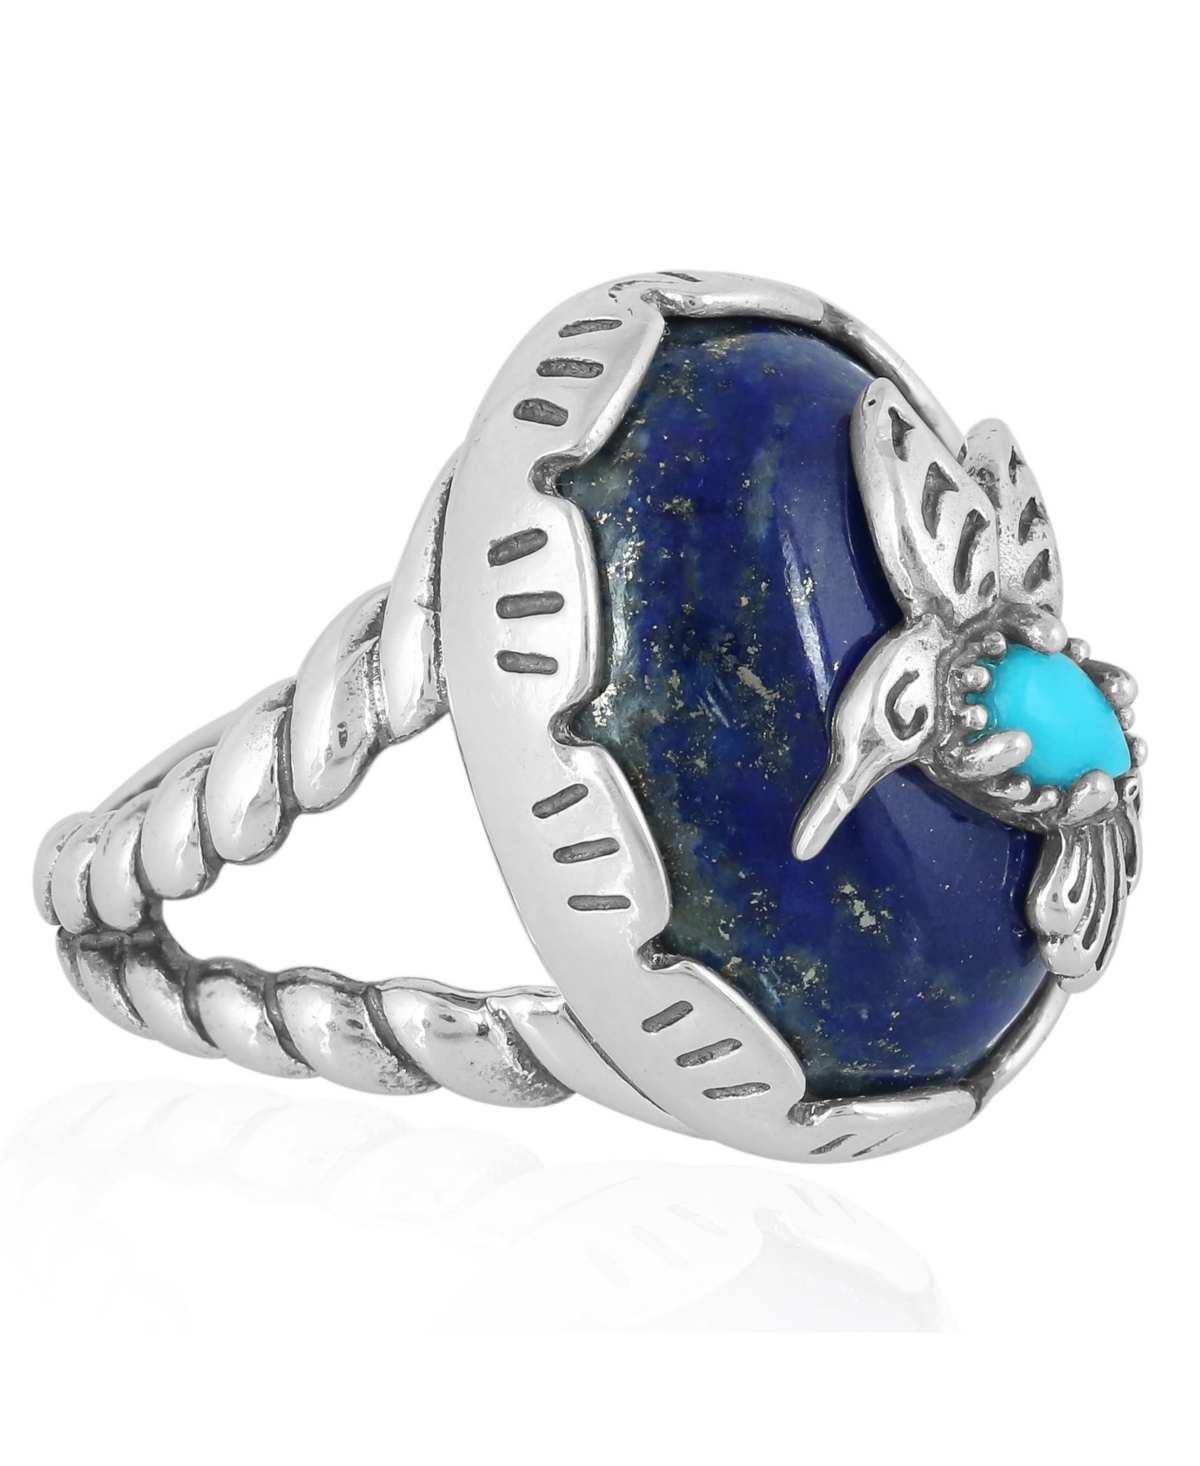 Sterling Silver Women's Ring, Blue Turquoise and Lapis Lazuli Hummingbird Design, Sizes 5-10 - Turquoise/gold